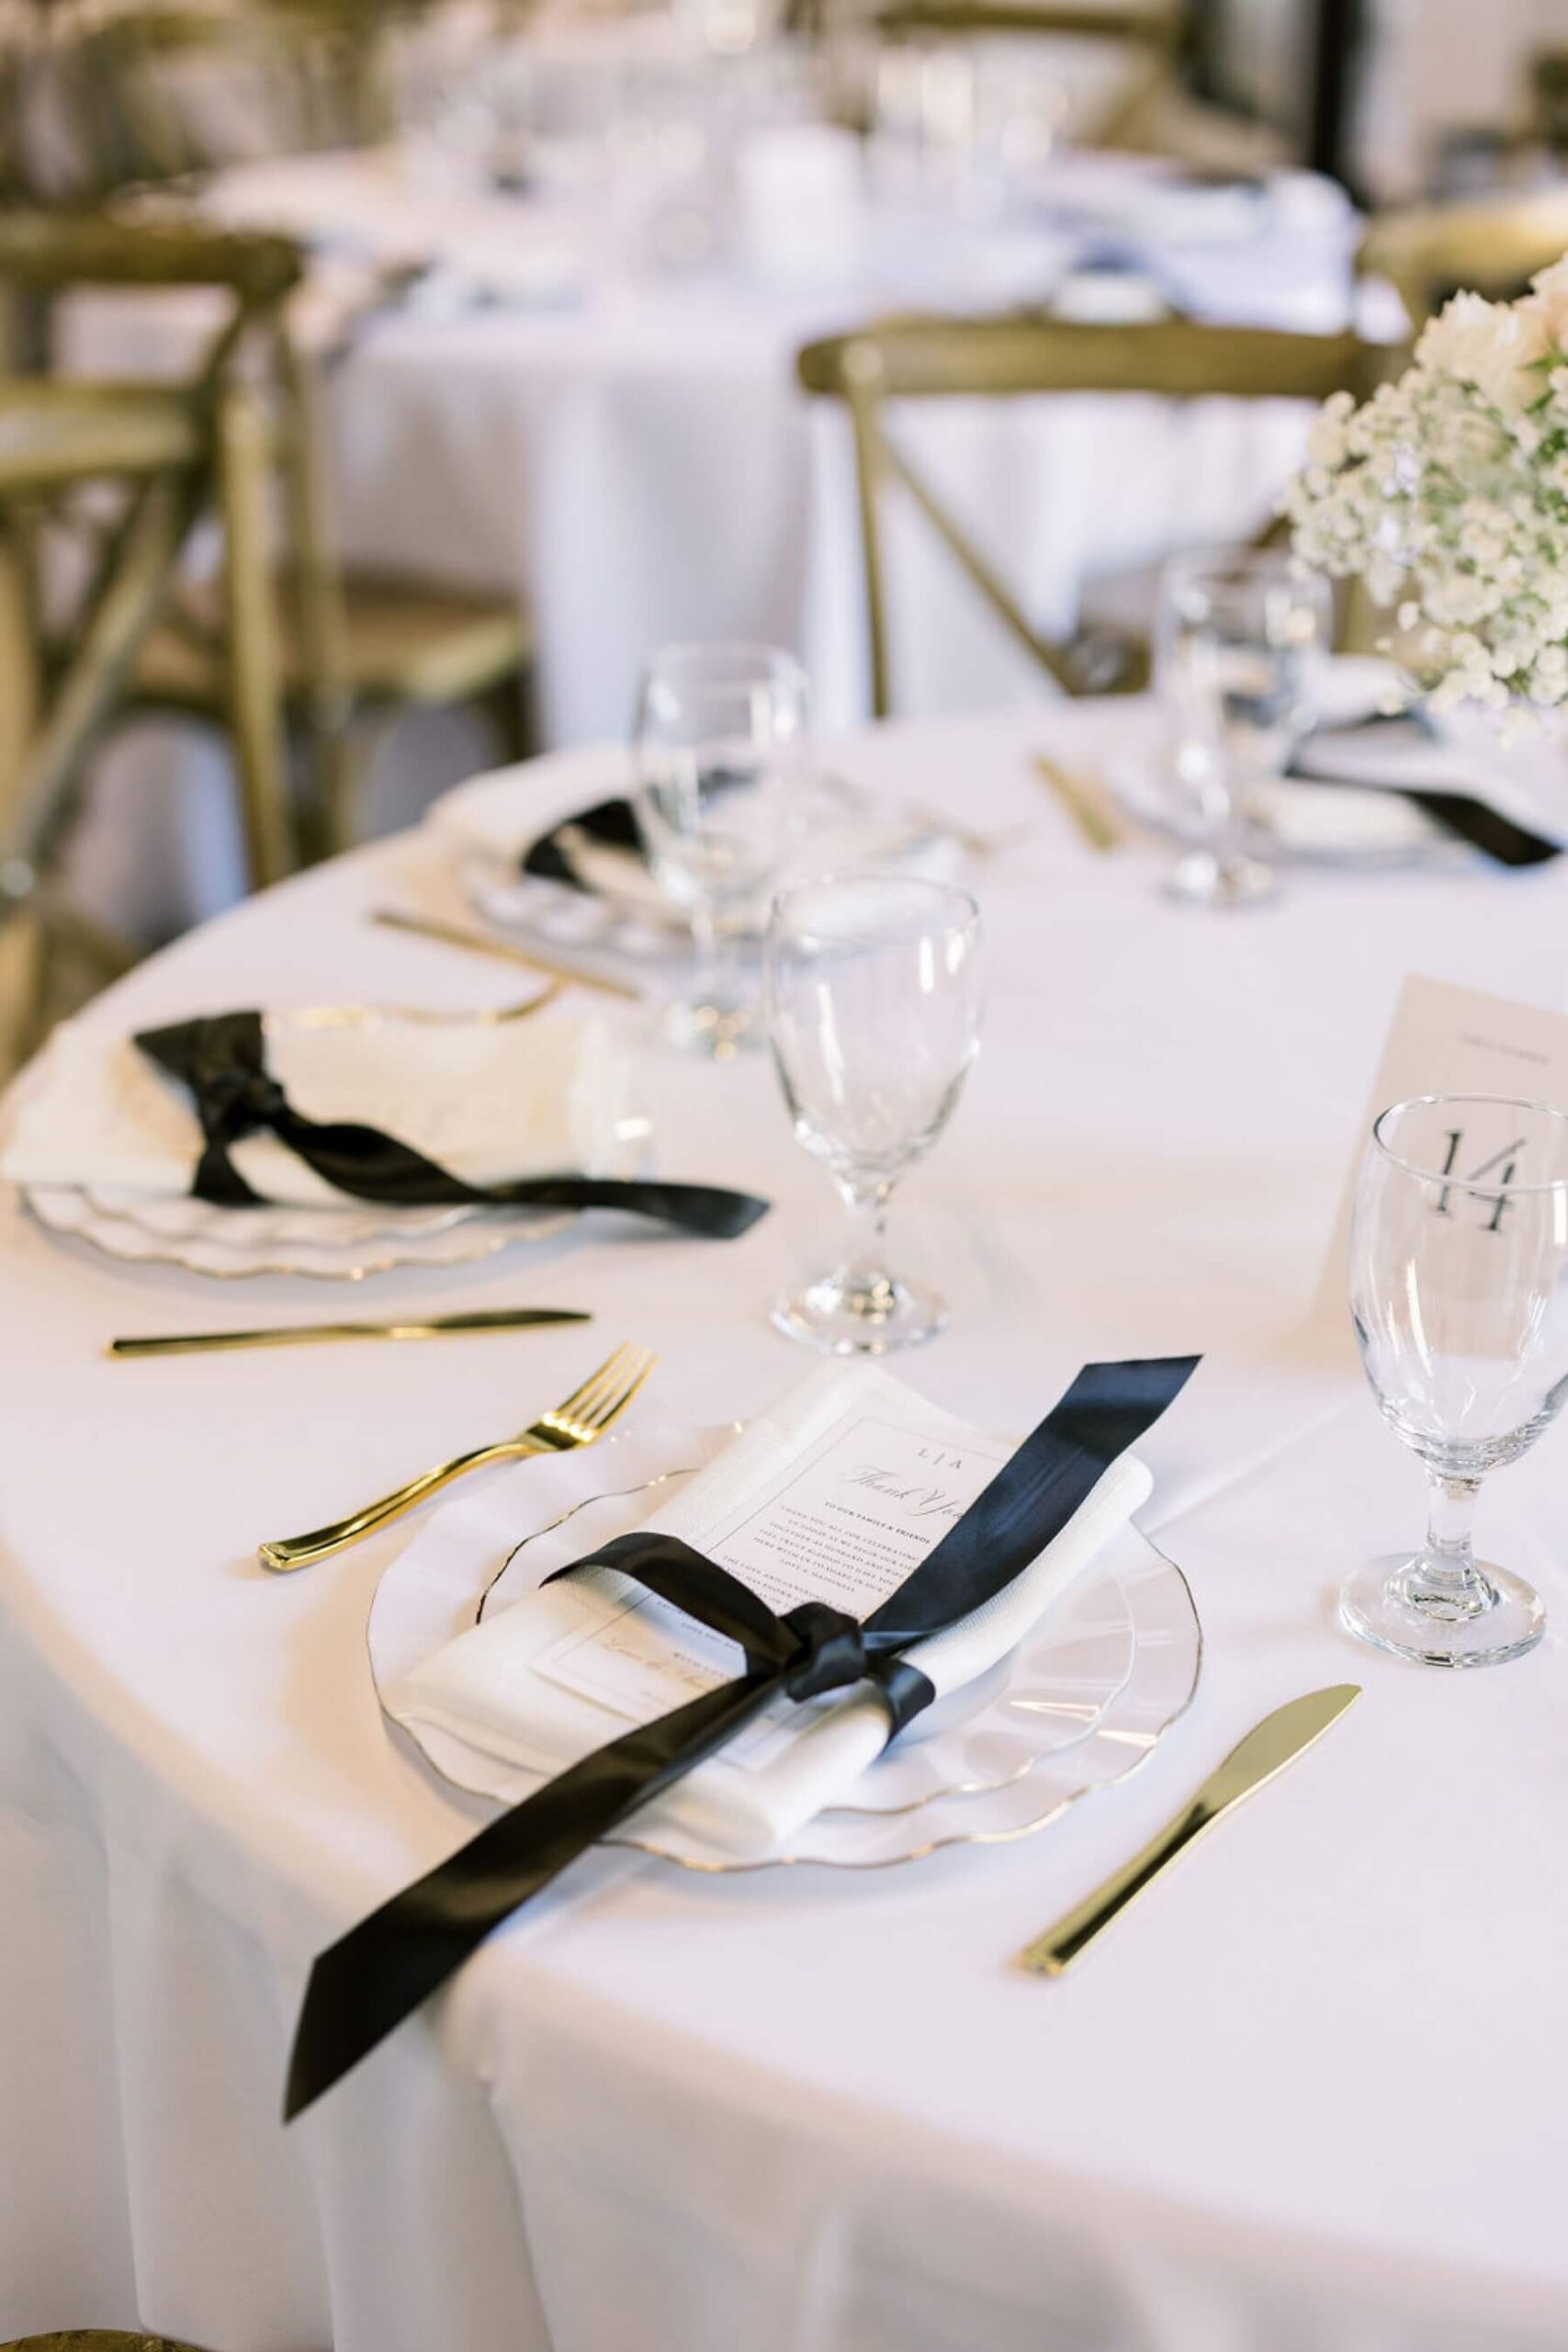 Black and white wedding reception featuring white menus tied with black satin ribbon and white floral arrangements 